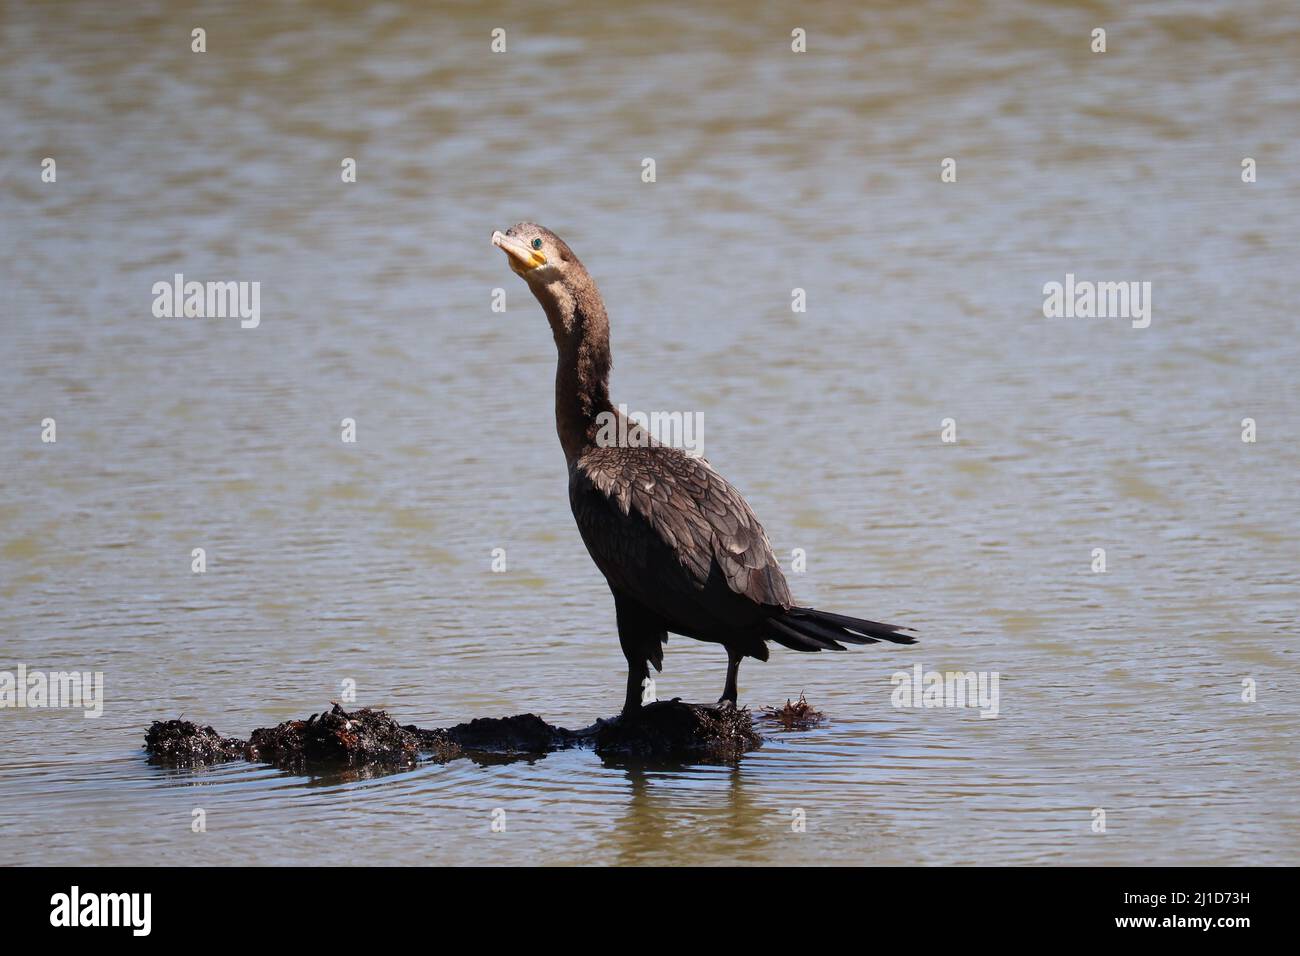 Neotropical cormorant or Nannopterum brasilianum standing on rock in the middle of a pond in the Riparian water ranch in Arizona. Stock Photo